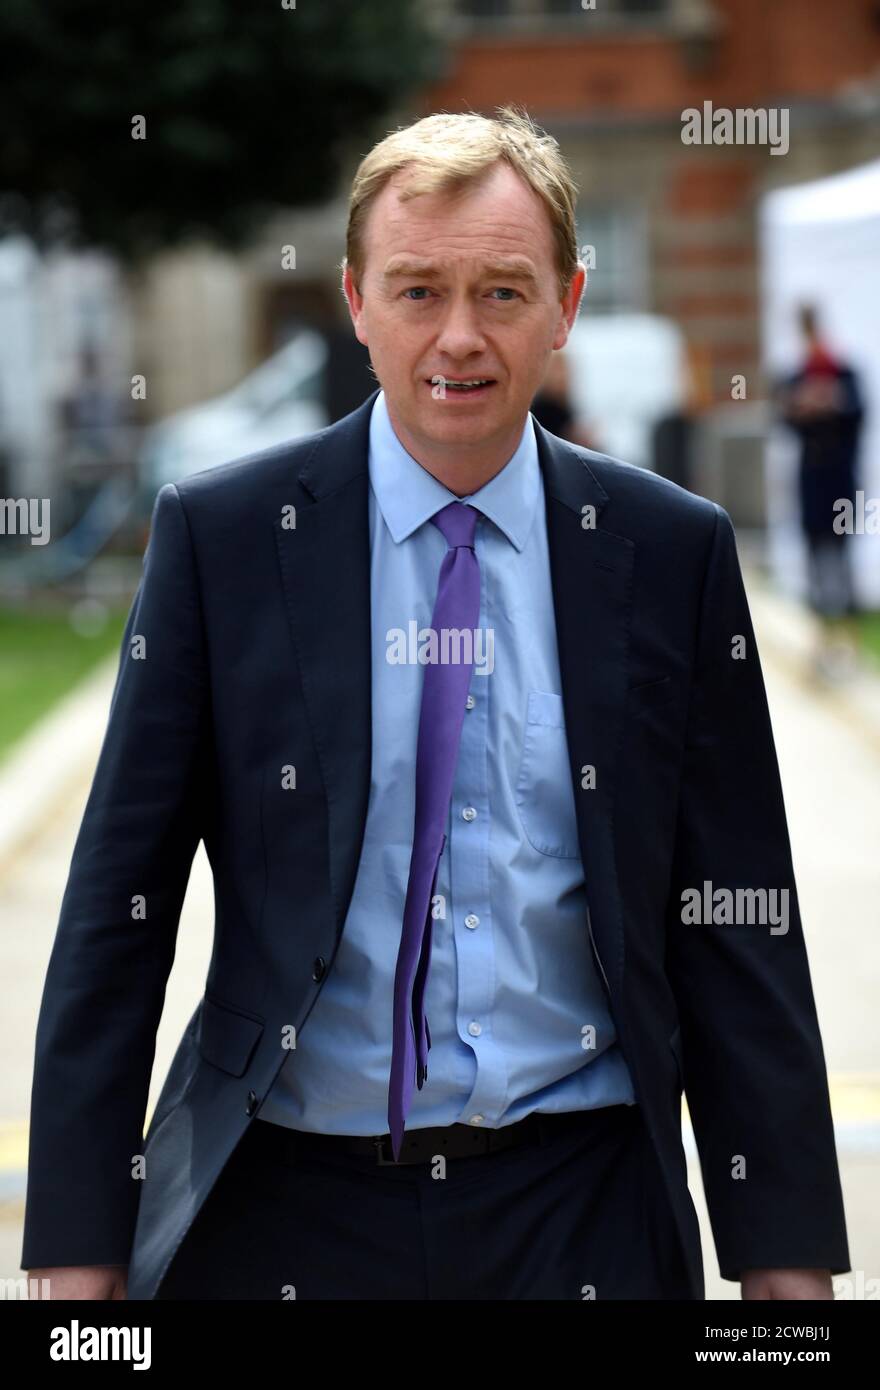 Photograph of Tim Farron. Timothy James Farron (1970-) a British politician who was the Leader of the Liberal Democrats between July 2015 and July 2017. He resigned following the 2017 United Kingdom general election. Stock Photo